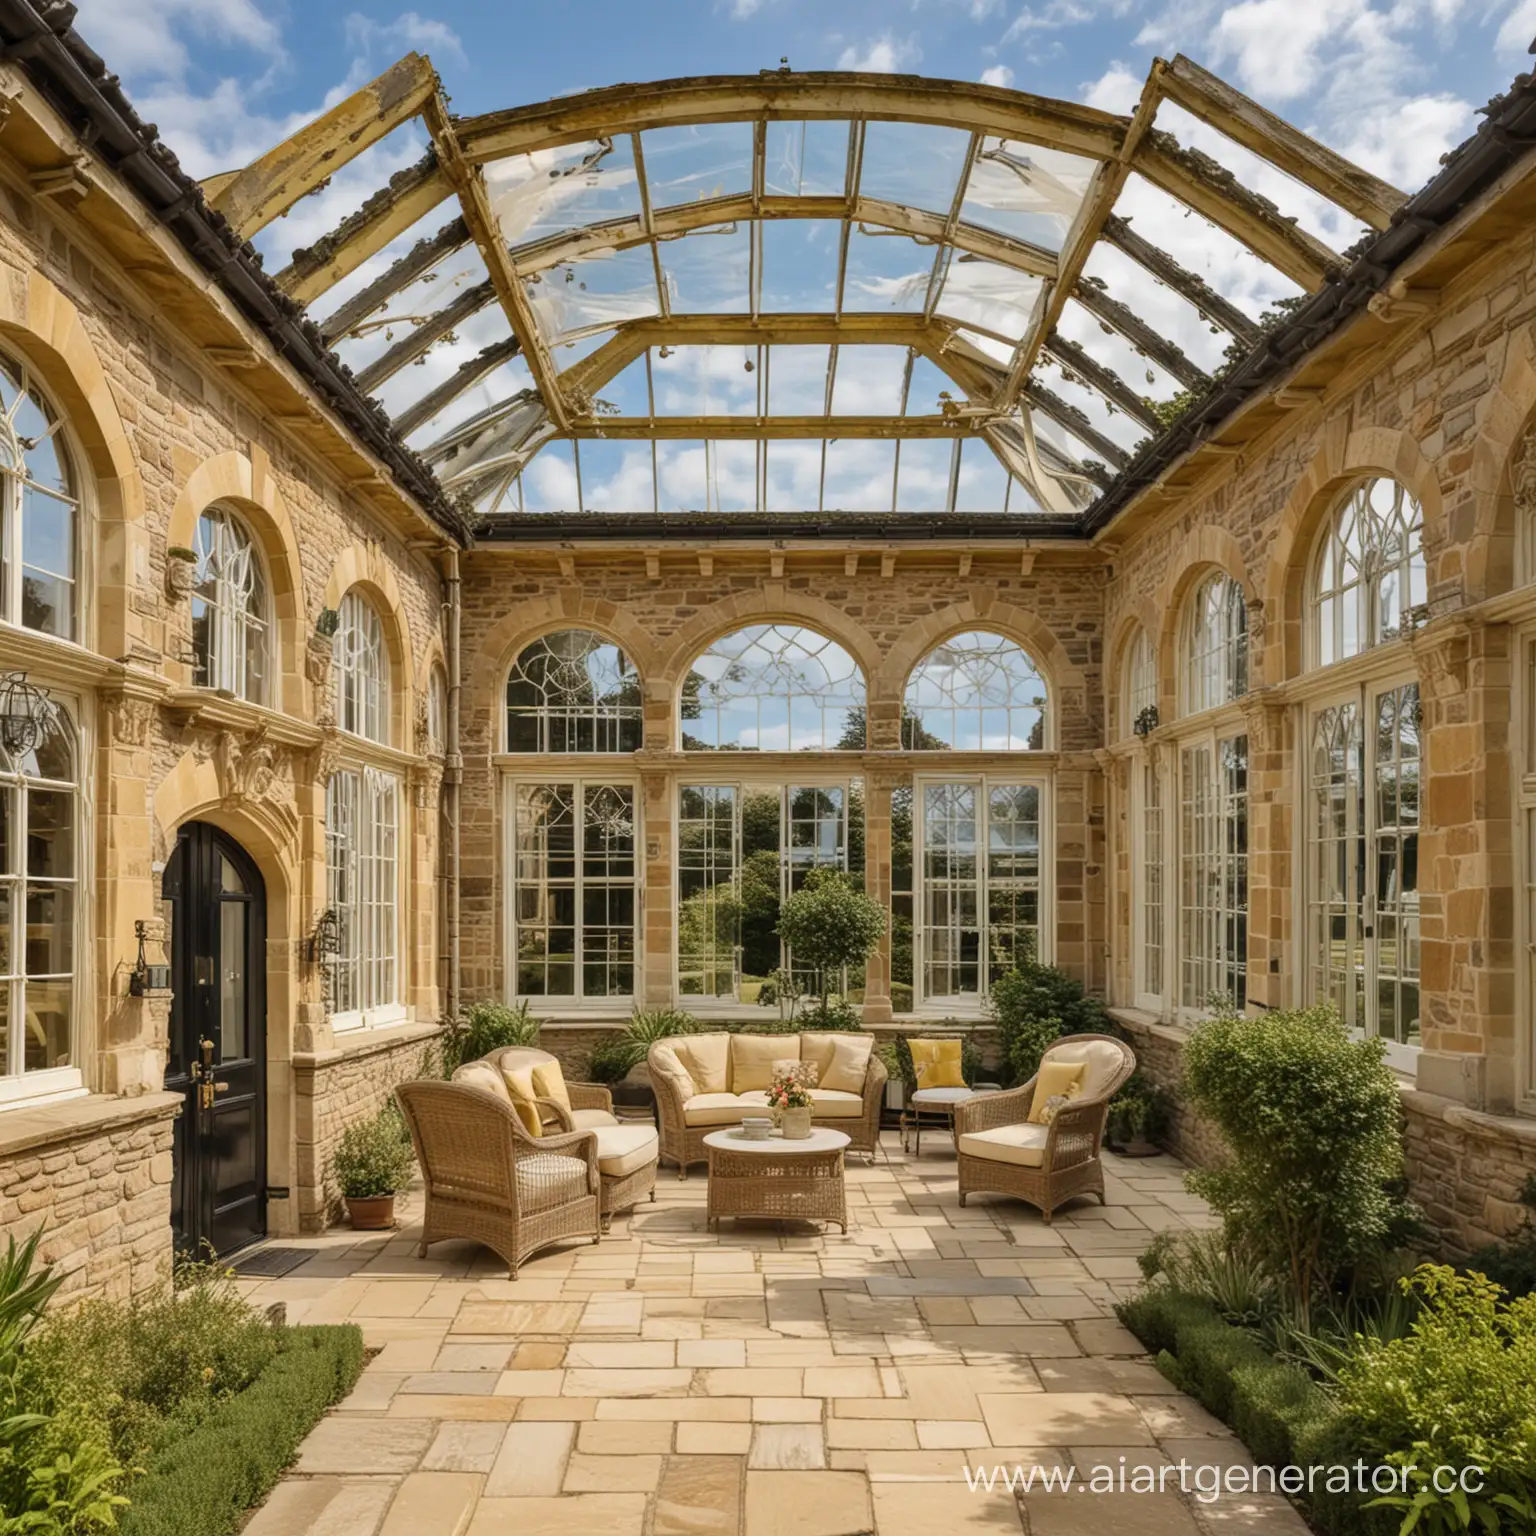 Majestic-Tudor-Estate-with-GlassRoofed-Orangery-in-Cornwall